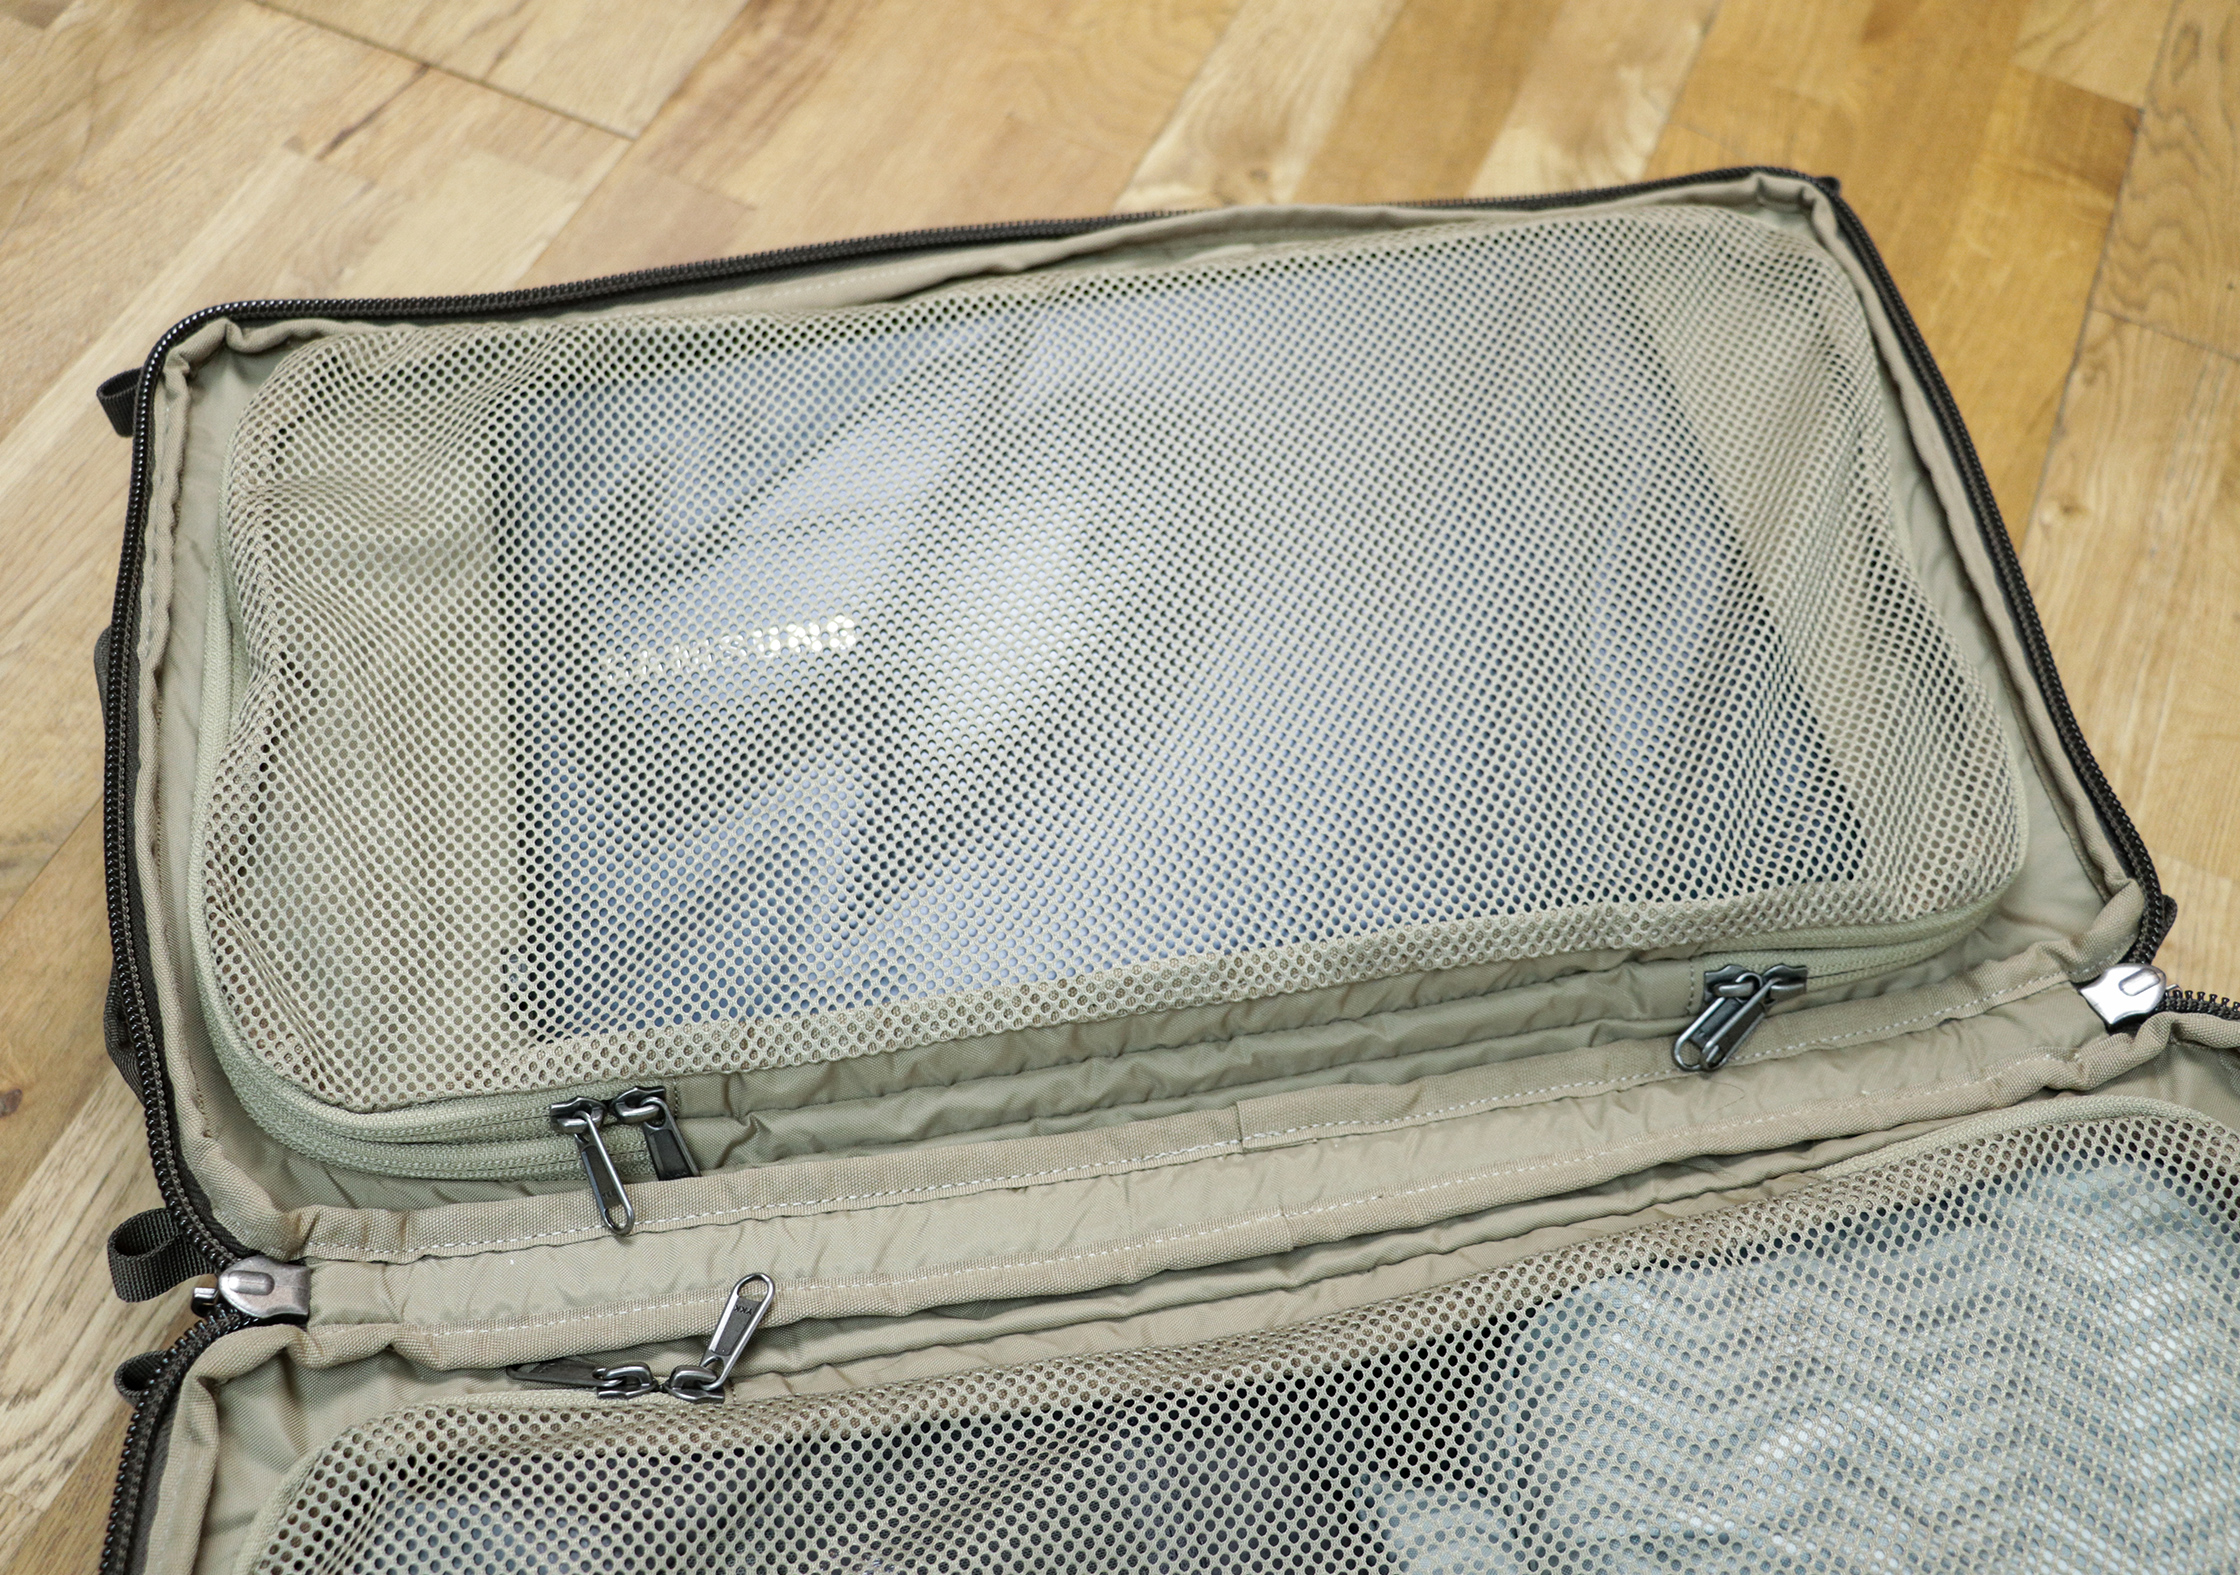 13" Laptop In The Thin Mesh Compartment Of The Fjallraven Splitpack